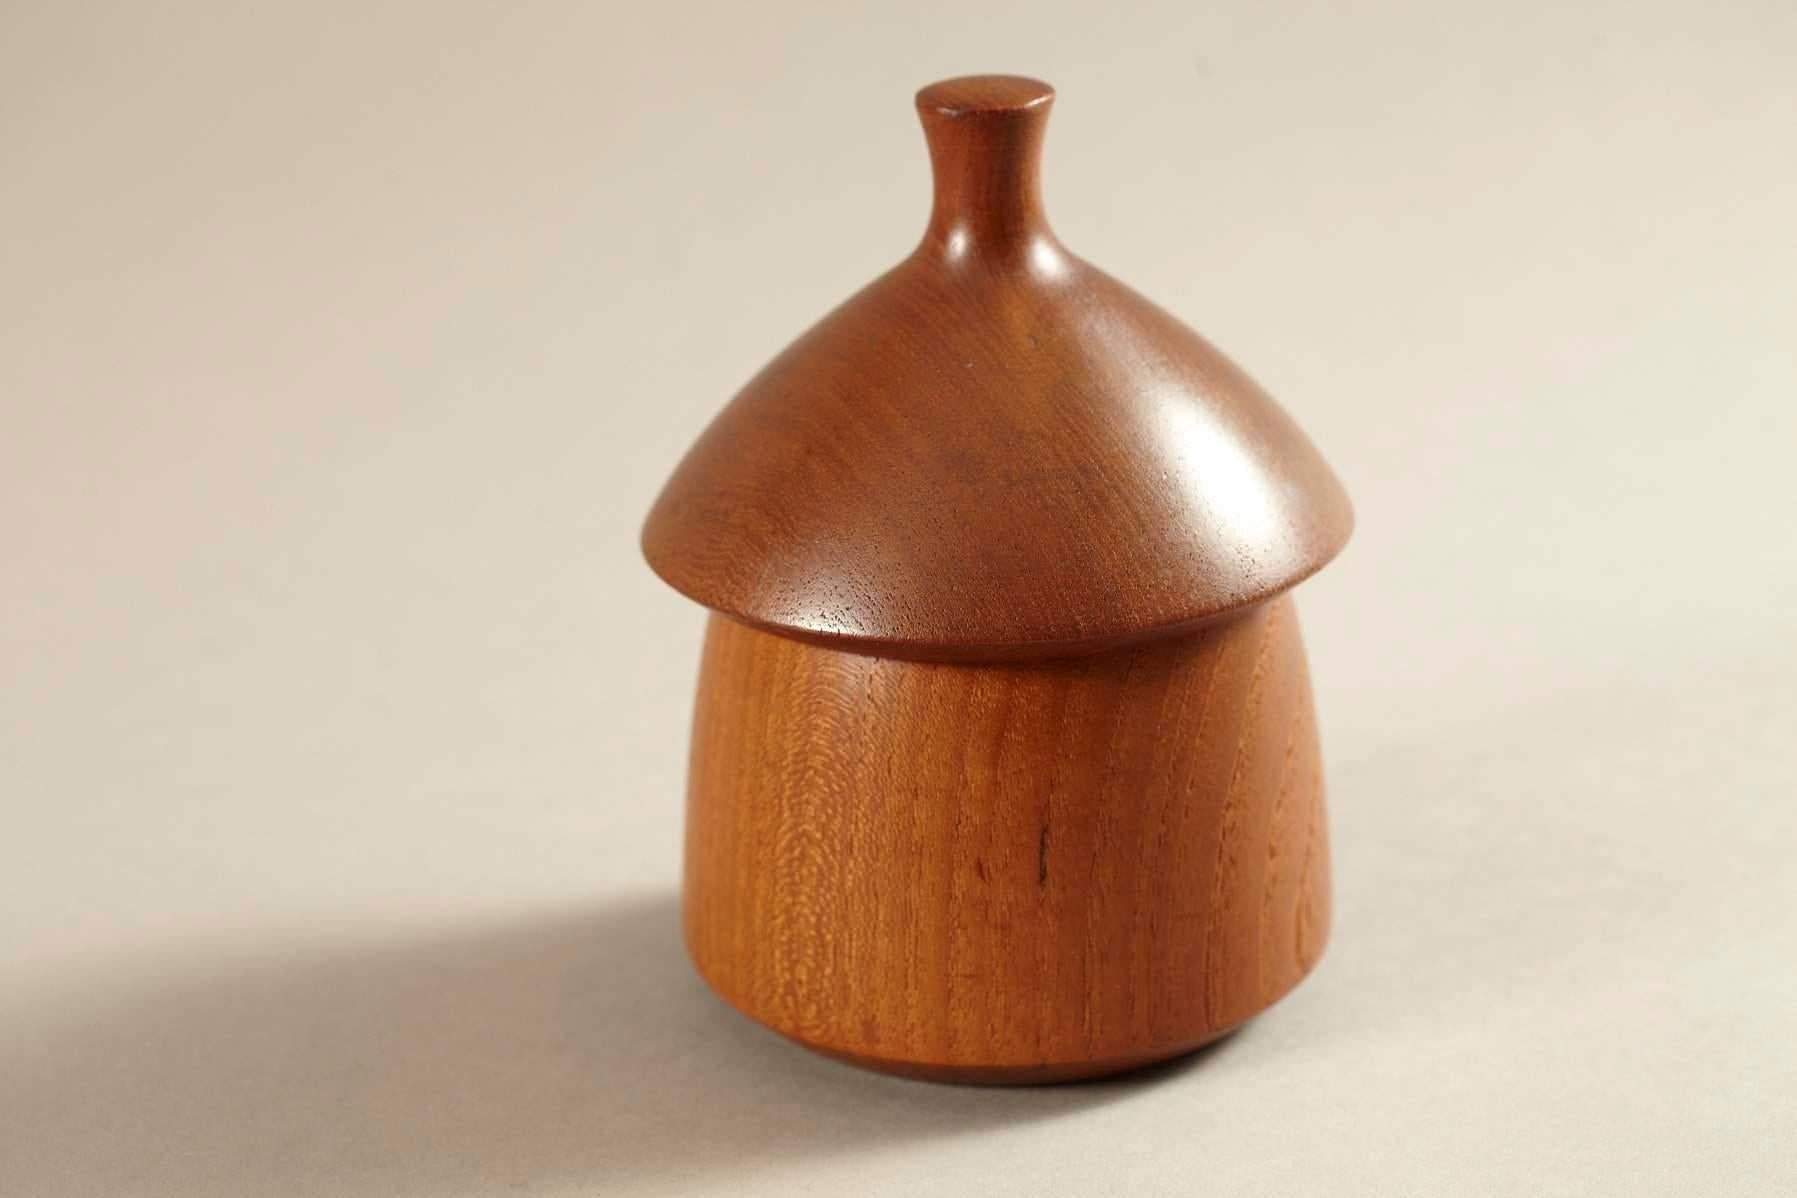 Sculptural lidded teak vessel by Jens Quistgaard for Dansk Designs Denmark IHQ. Early design, shows the Four Ducks mark on the bottom.
Very nice acorn form with beautiful grain and patina. One small and shallow chip to one side of the top of the